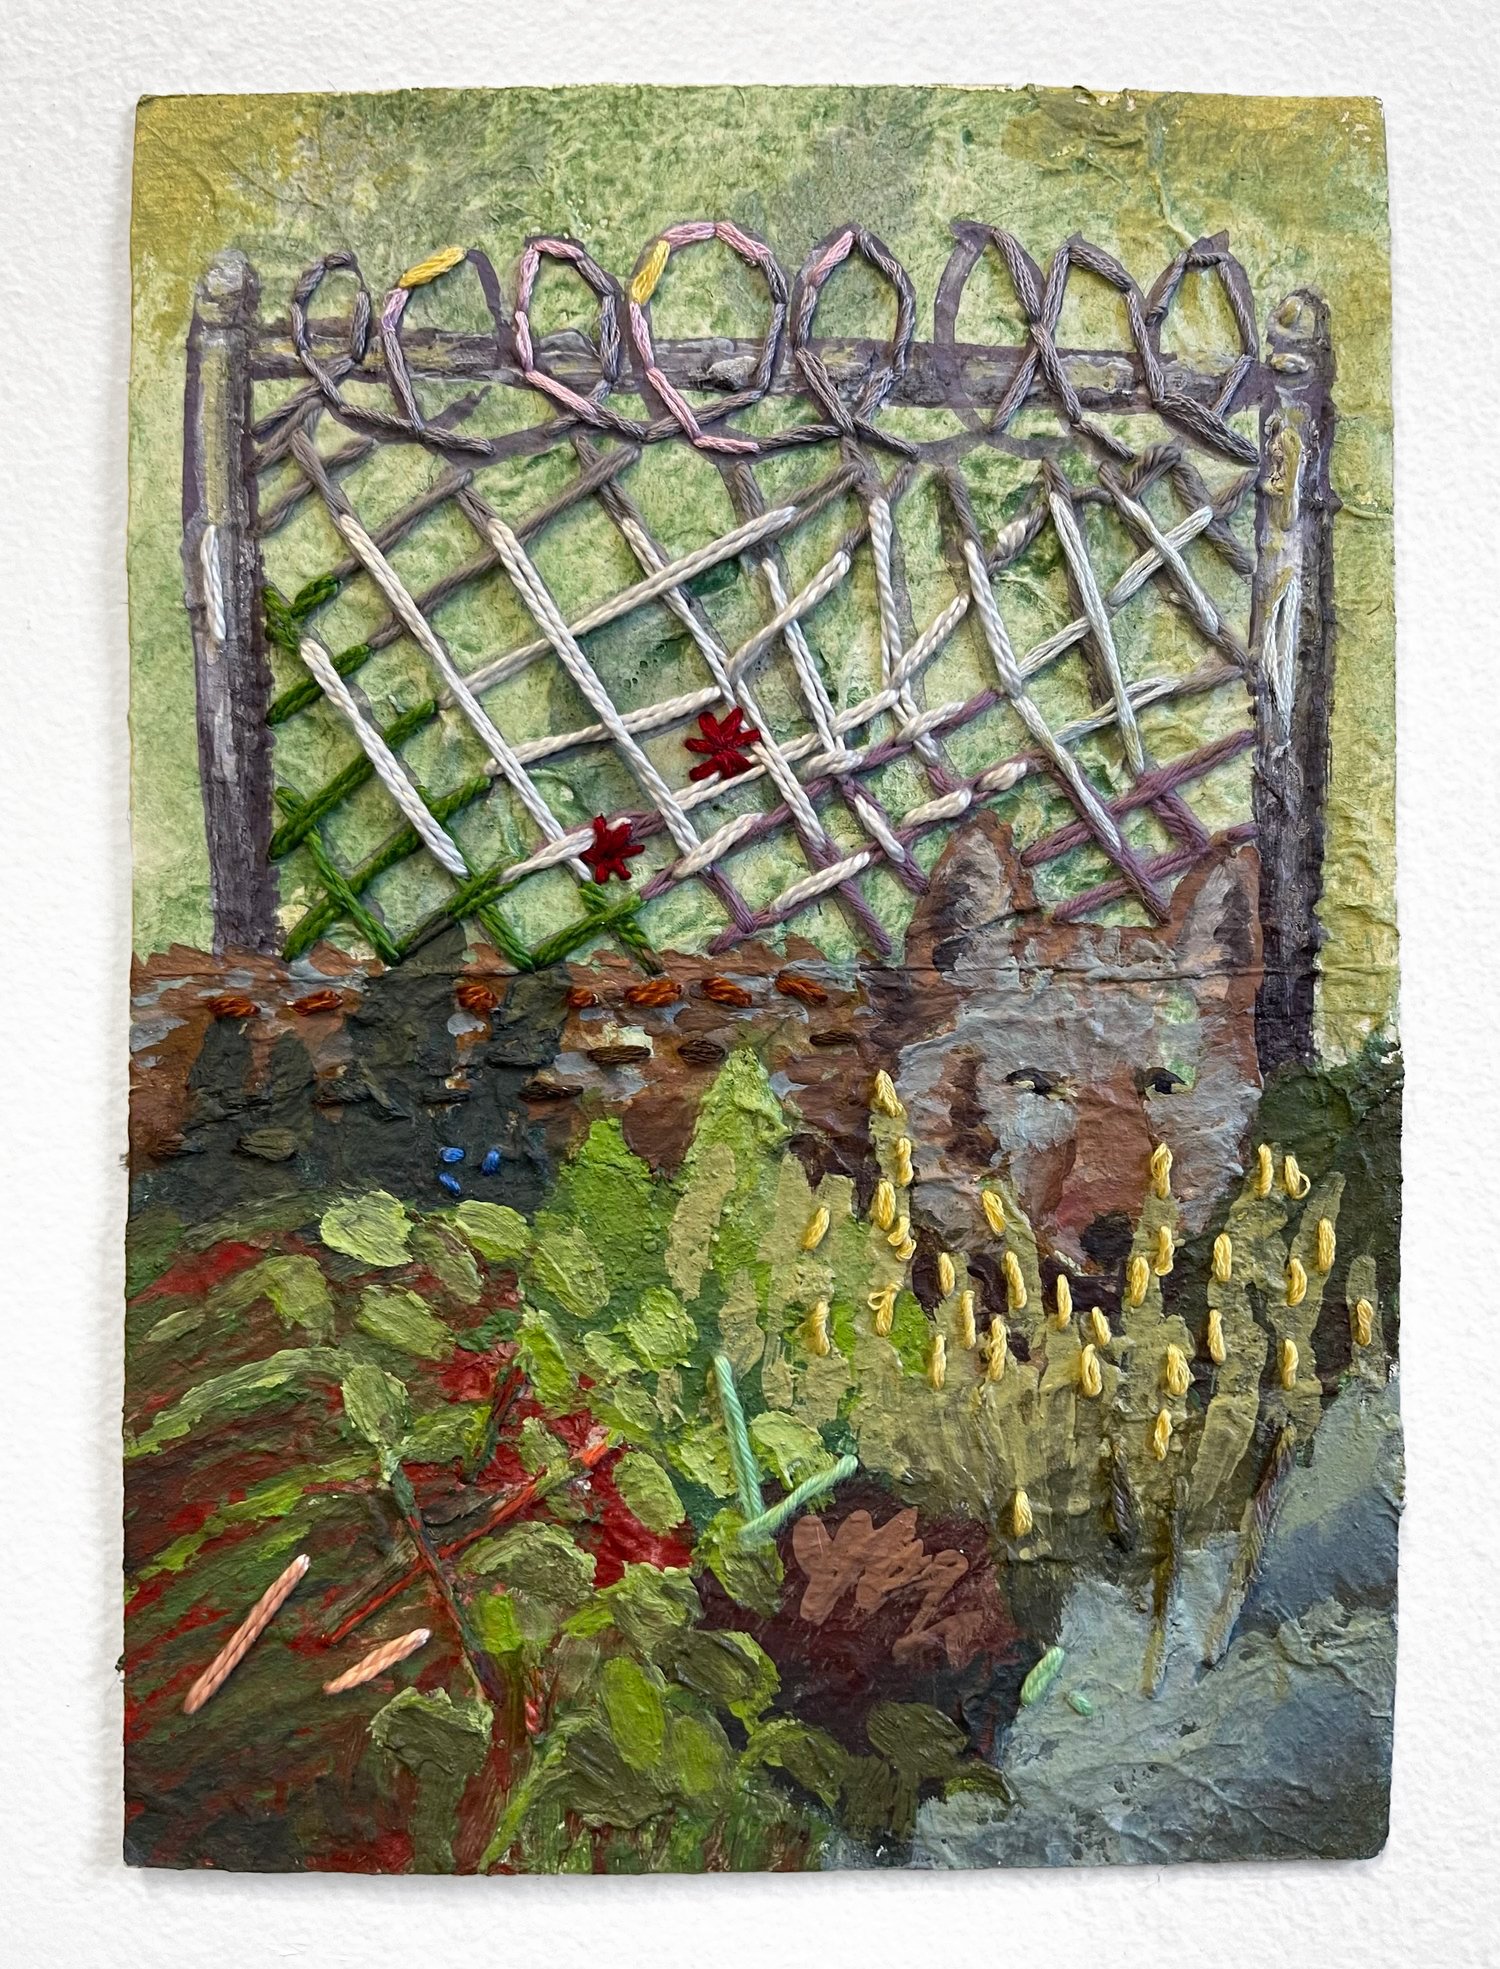  “Behind the Walgreens Parking Lot”,  9.5”h x 6.5”w, Acrylic, embroidery, and collage on paper, 2023   